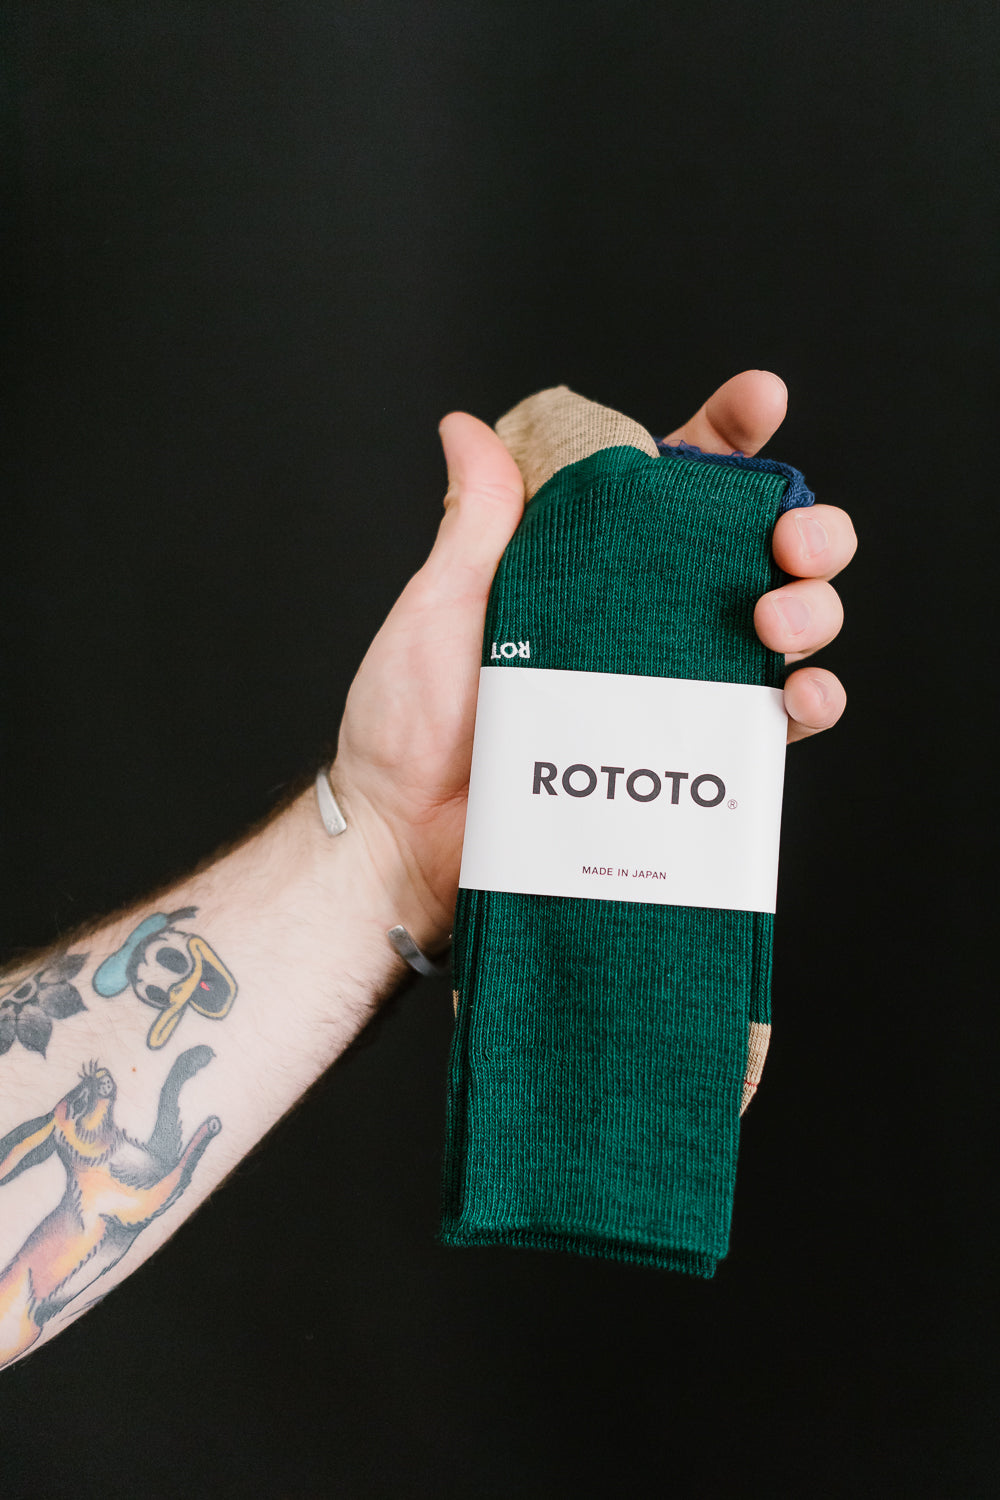 R1394 - Organic Cotton and Recycled Polyester Ribbed Crew Socks - Dark Green, Beige